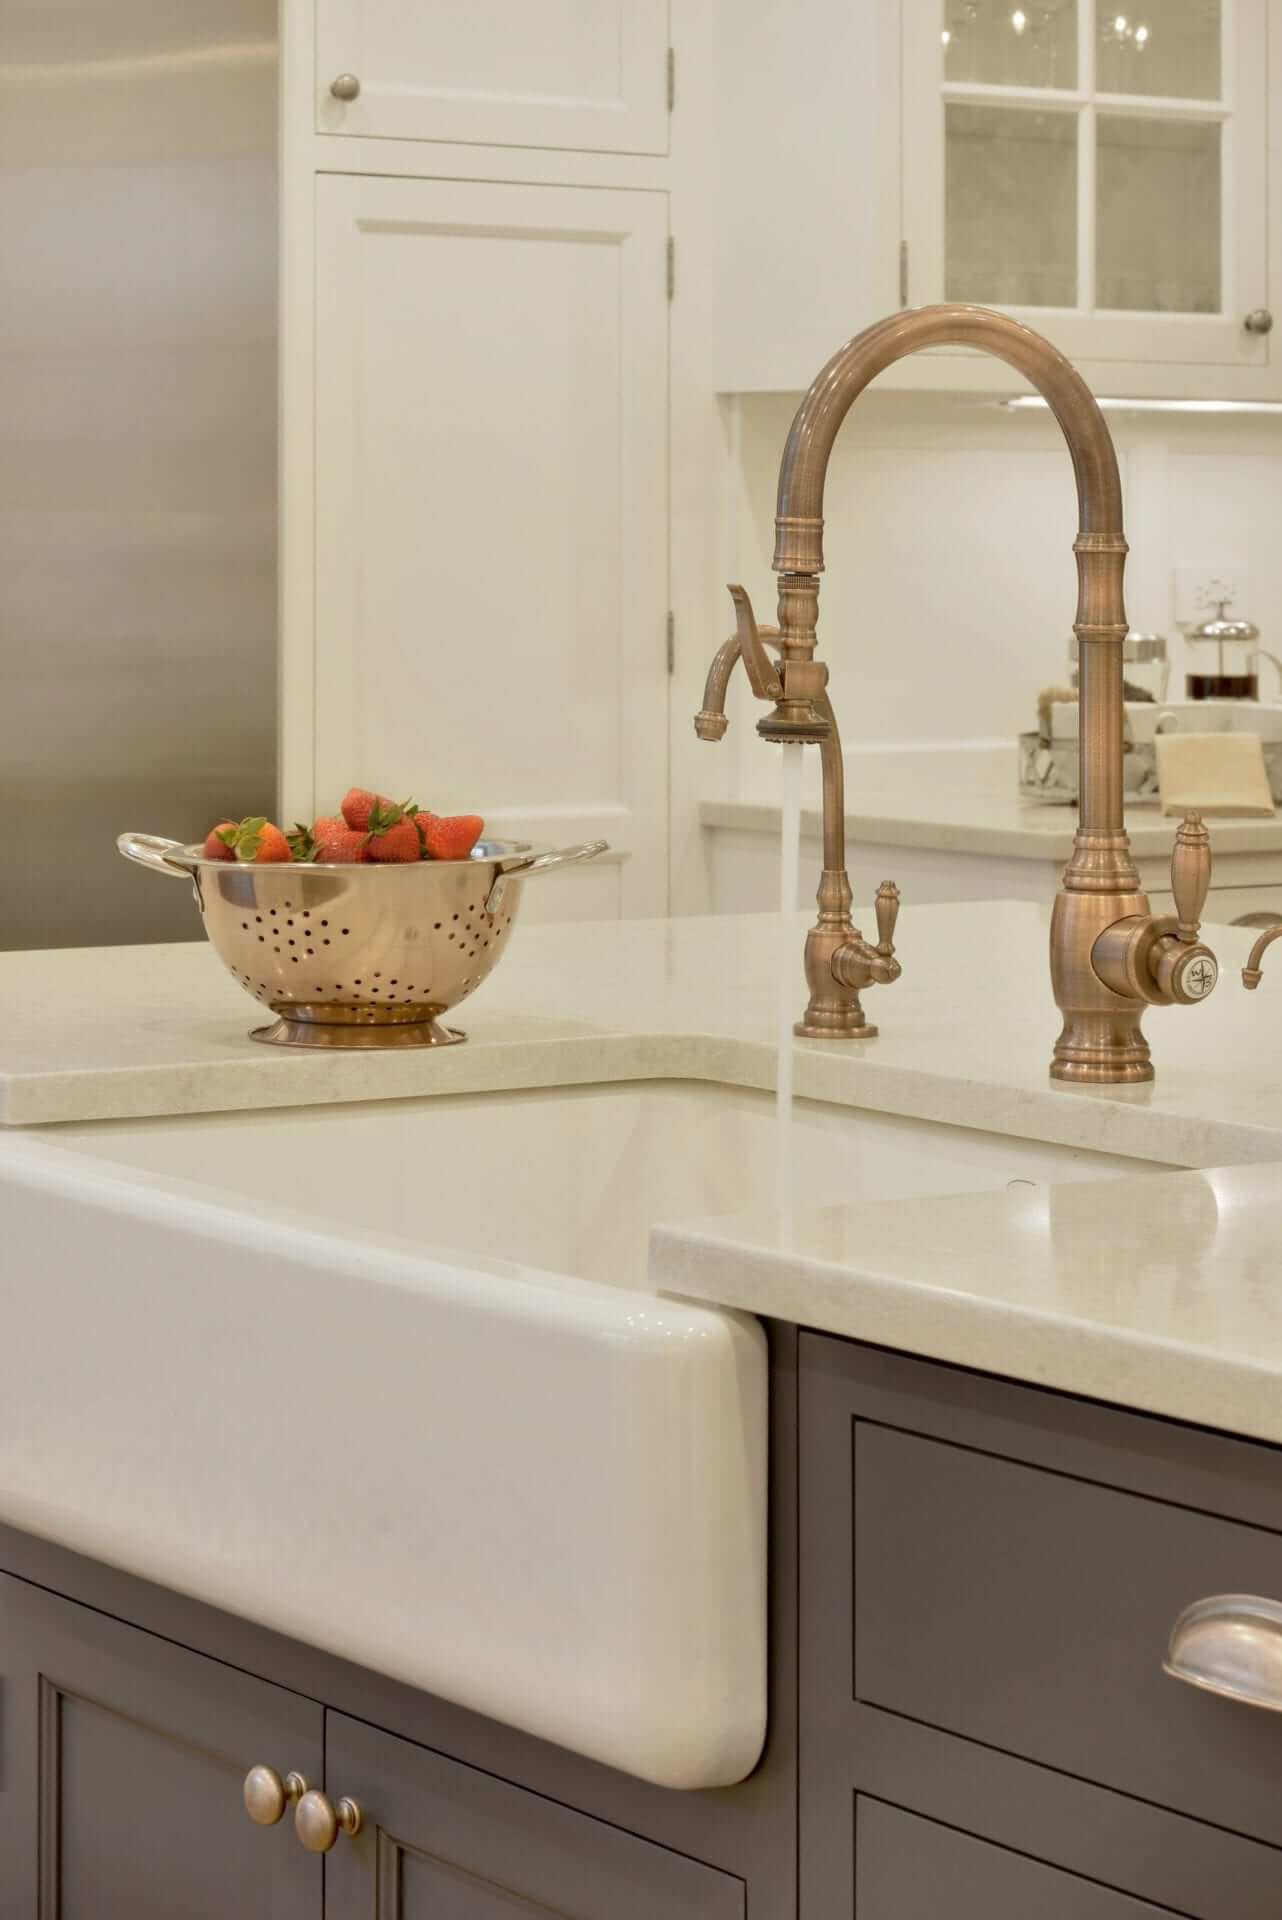 Elegant kitchen with Bilotta cabinetry, white apron sink and brass faucet.